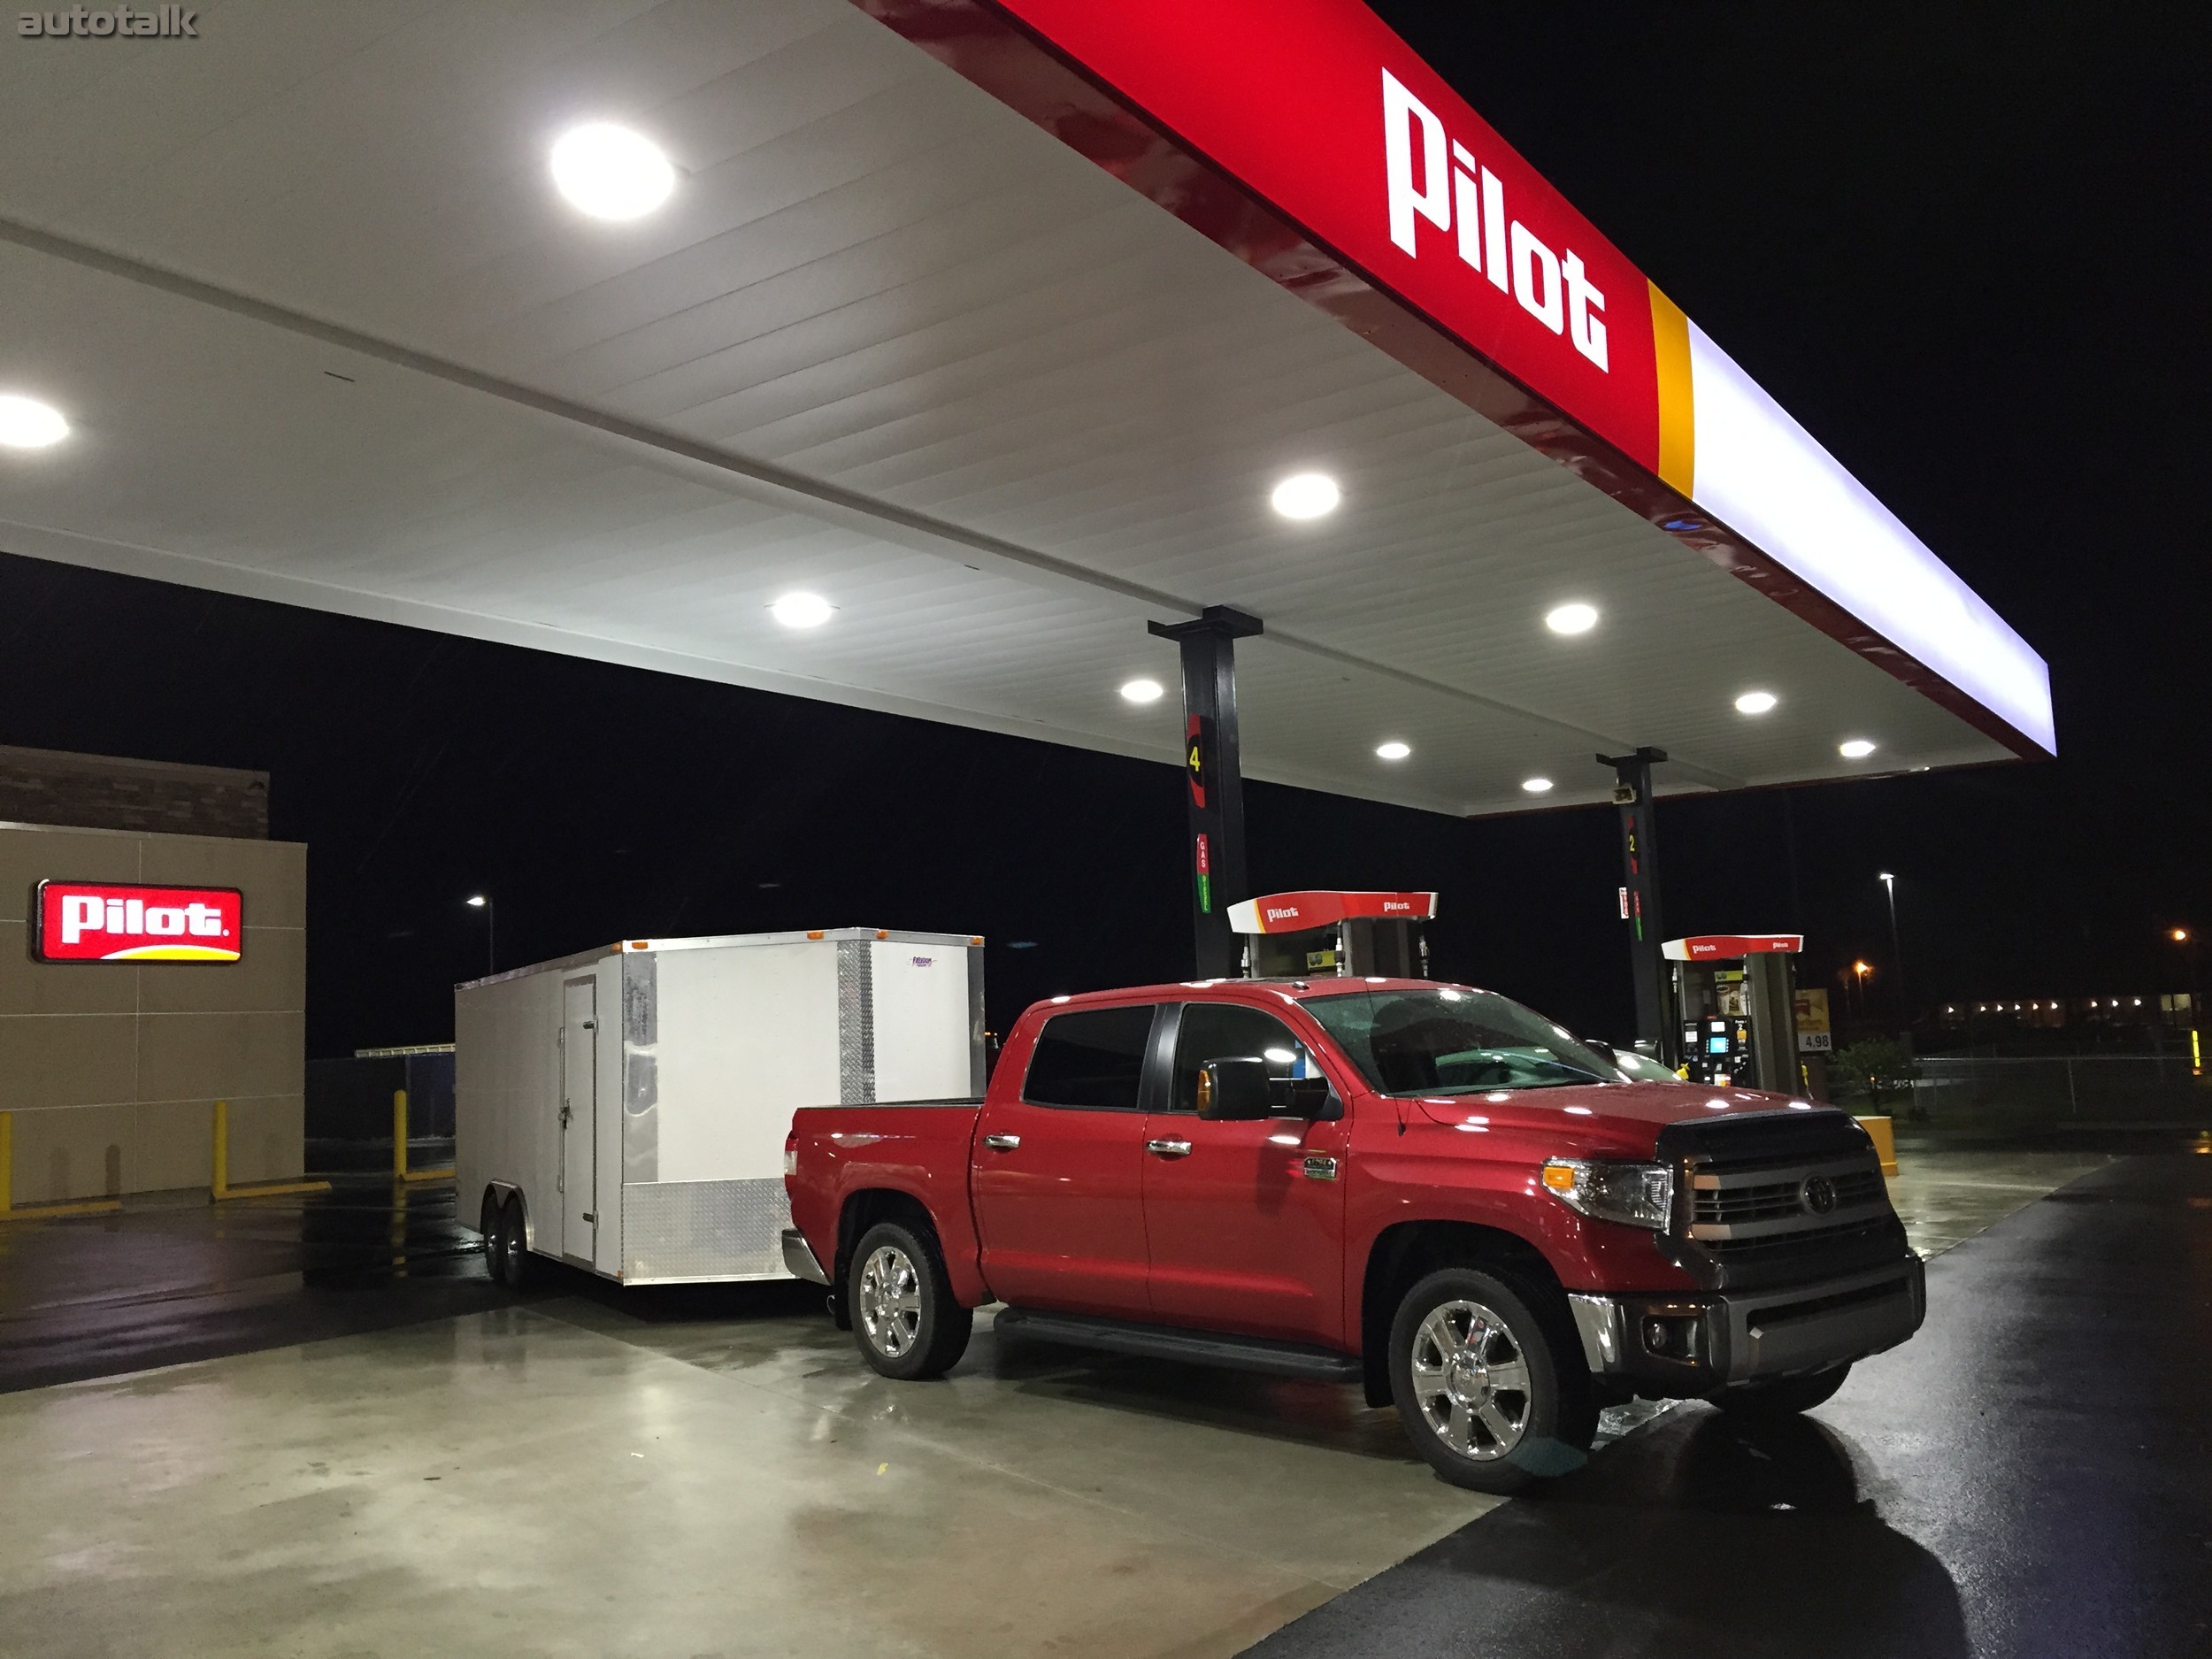 2014 Toyota Tundra 1794 Towing Review